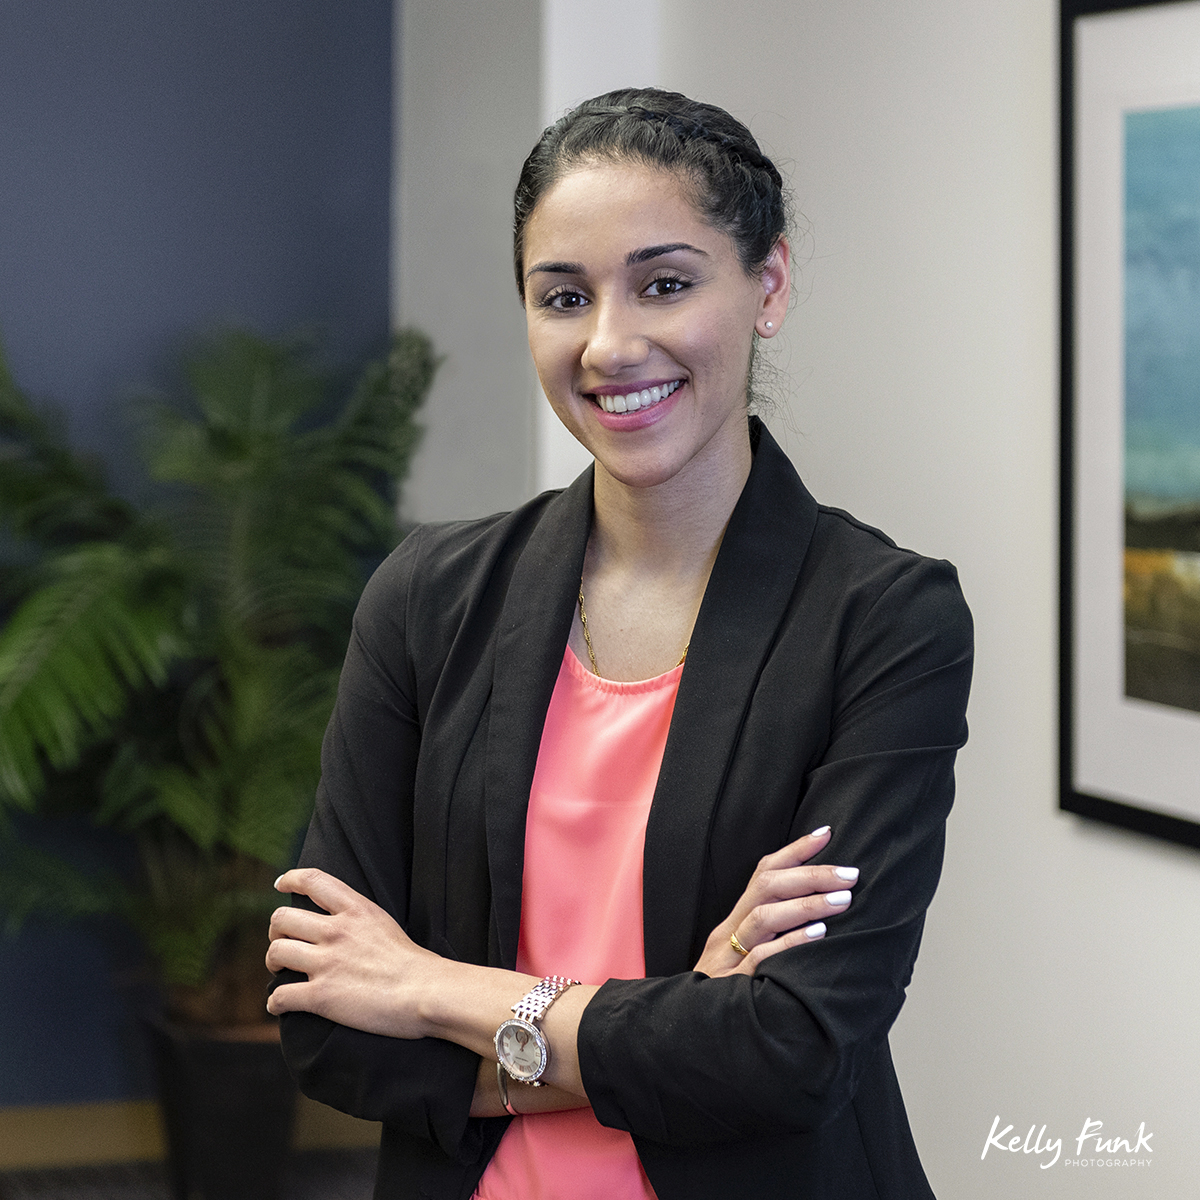 Portrait of a young woman working for RBC in Kamloops, British Columbia, Canada